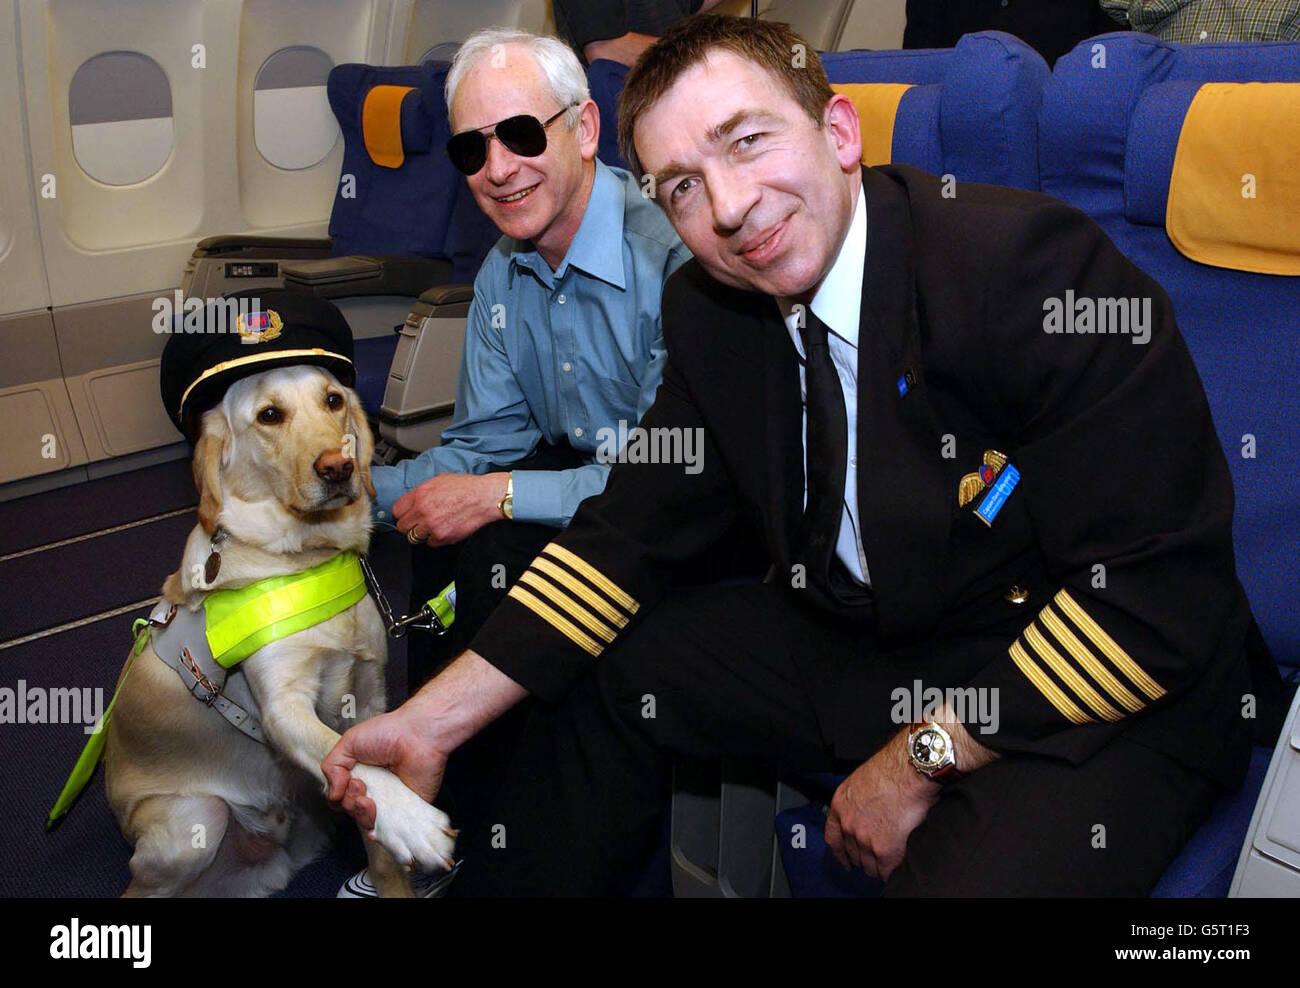 Captain David Robertson (bmi british midland 737 Technical Manager) greeting labrador golden retriever guide dog Terry and his owner Ken Weinling on board a bmi british midland A330 airbus, at the Stockley Training Centre near Heathrow, London. *bmi british midland has provided The Guide Dogs for the Blind Association with ten free flights a year on which to train guide dogs. Stock Photo